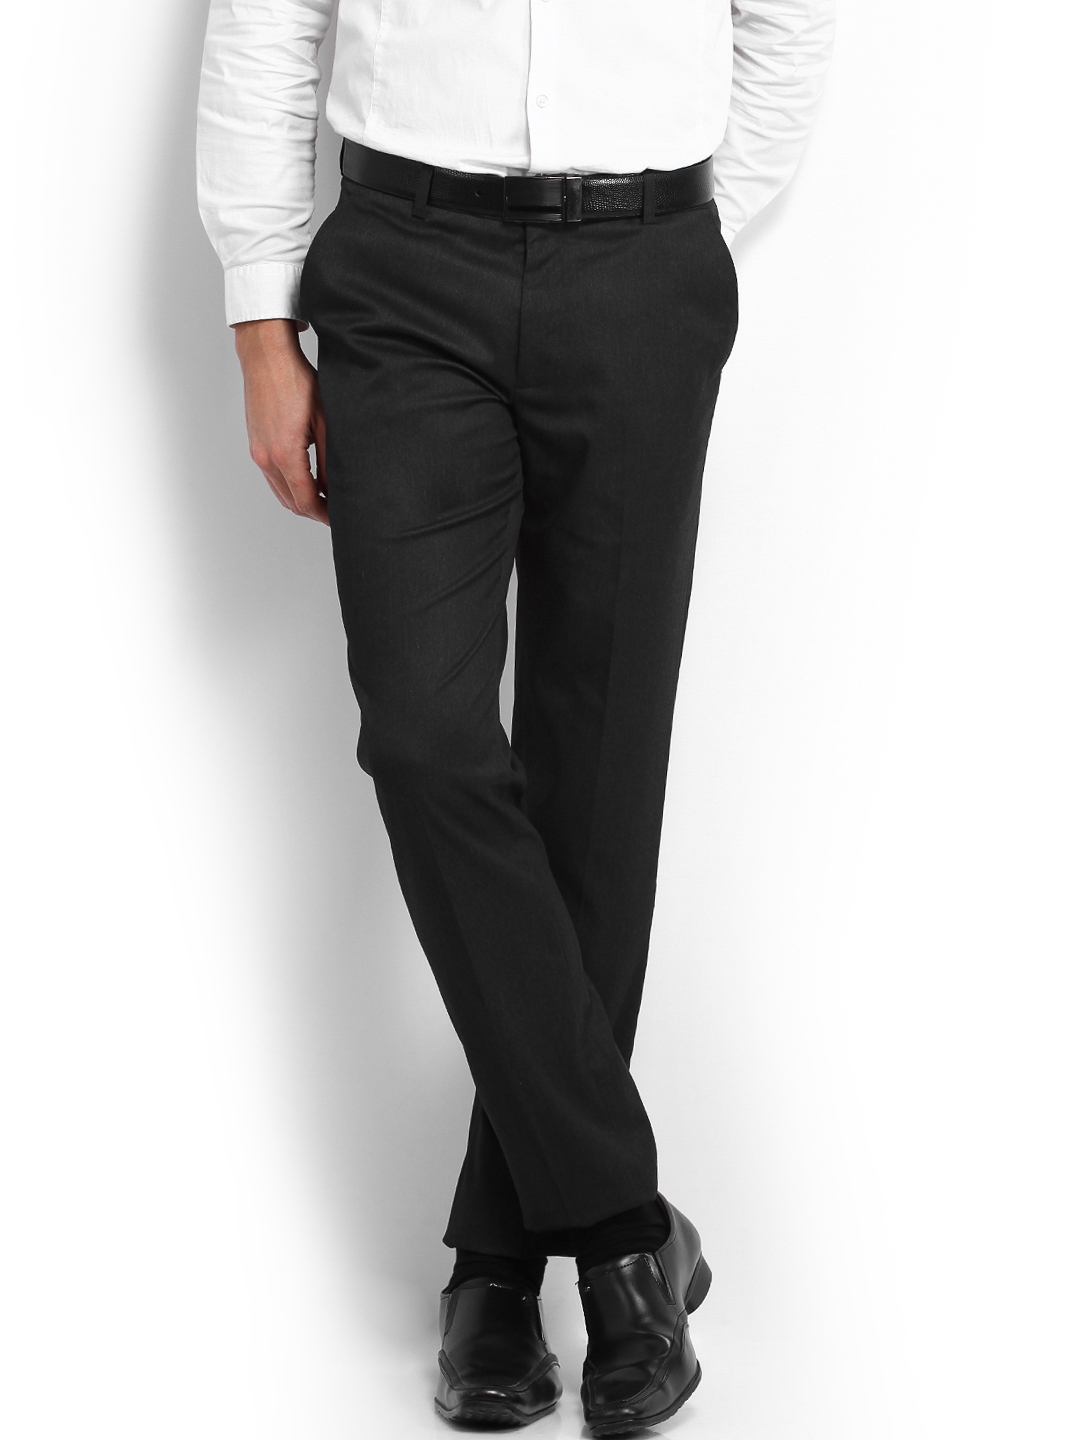 Buy Independence Men Charcoal Grey Slim Fit Formal Trousers - Trousers ...